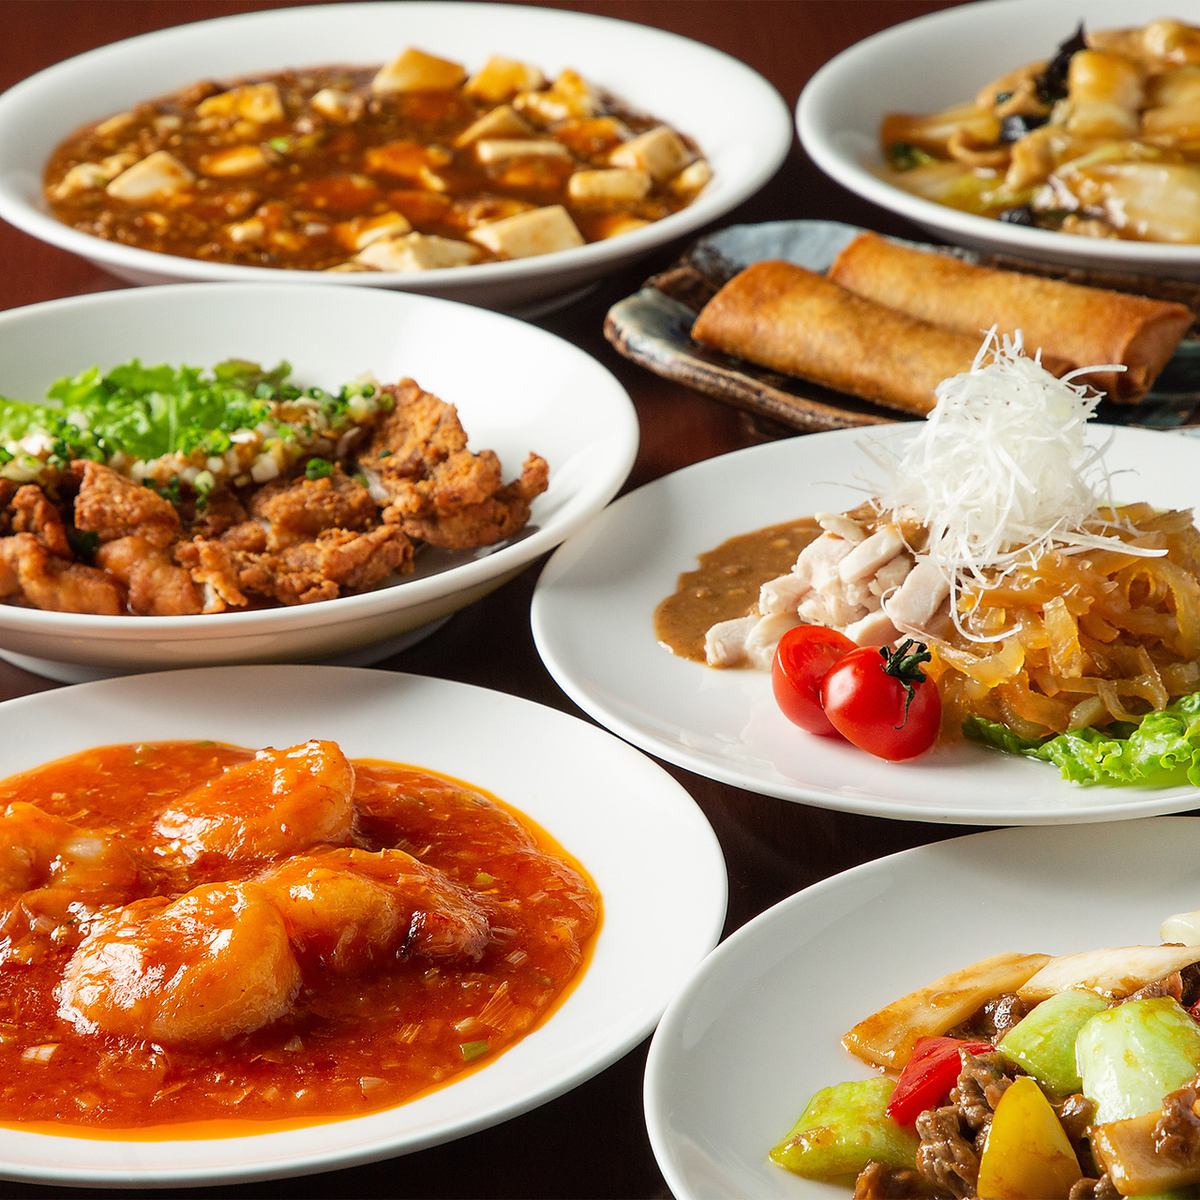 Reasonably priced authentic Chinese food from bargain lunches to banquet courses.For banquets and New Year's parties★